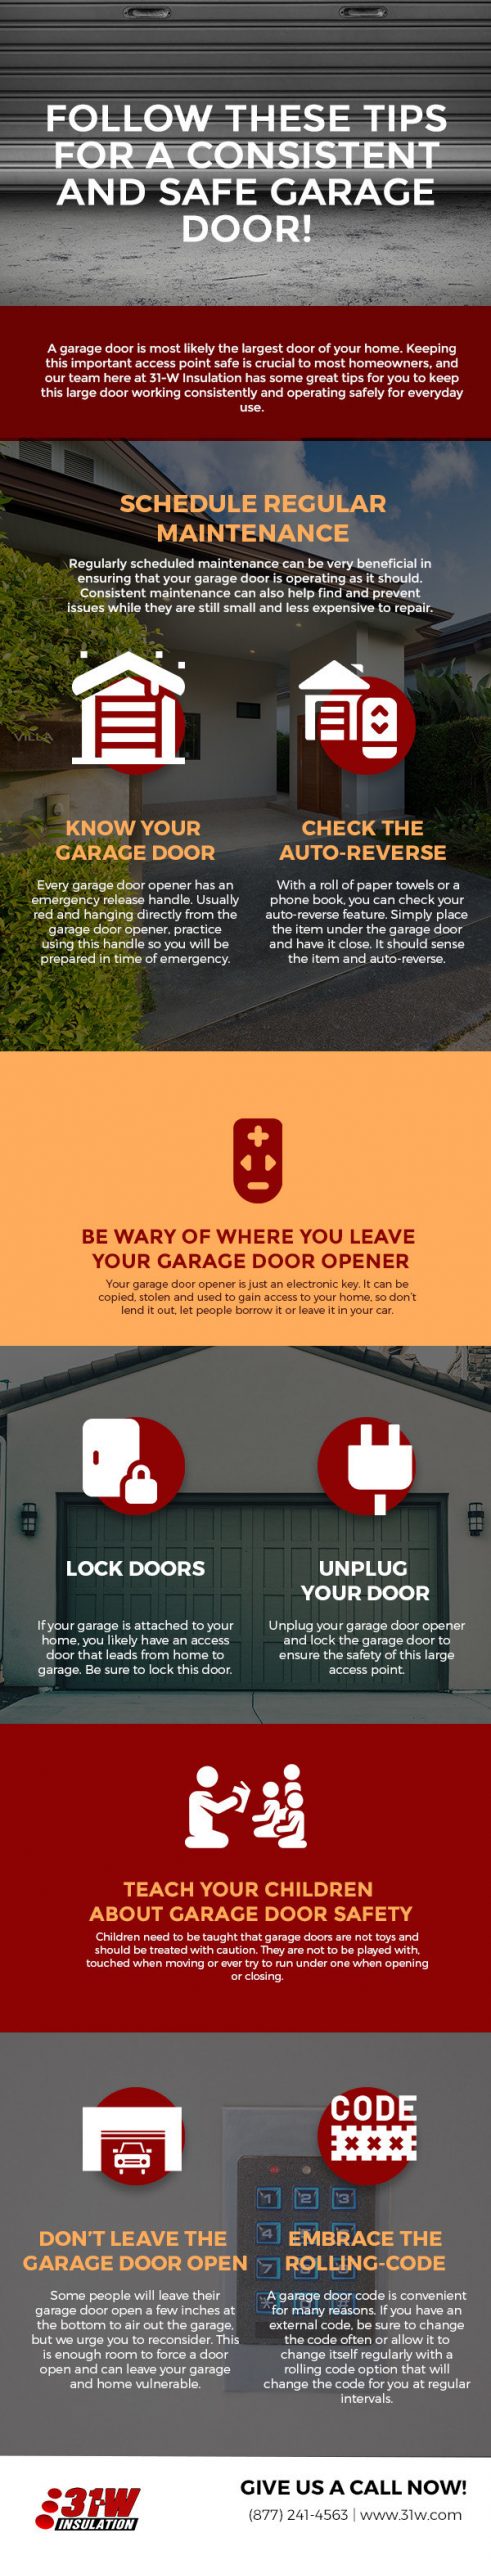 Follow These Tips for a Consistent and Safe Garage Door! [infographic]